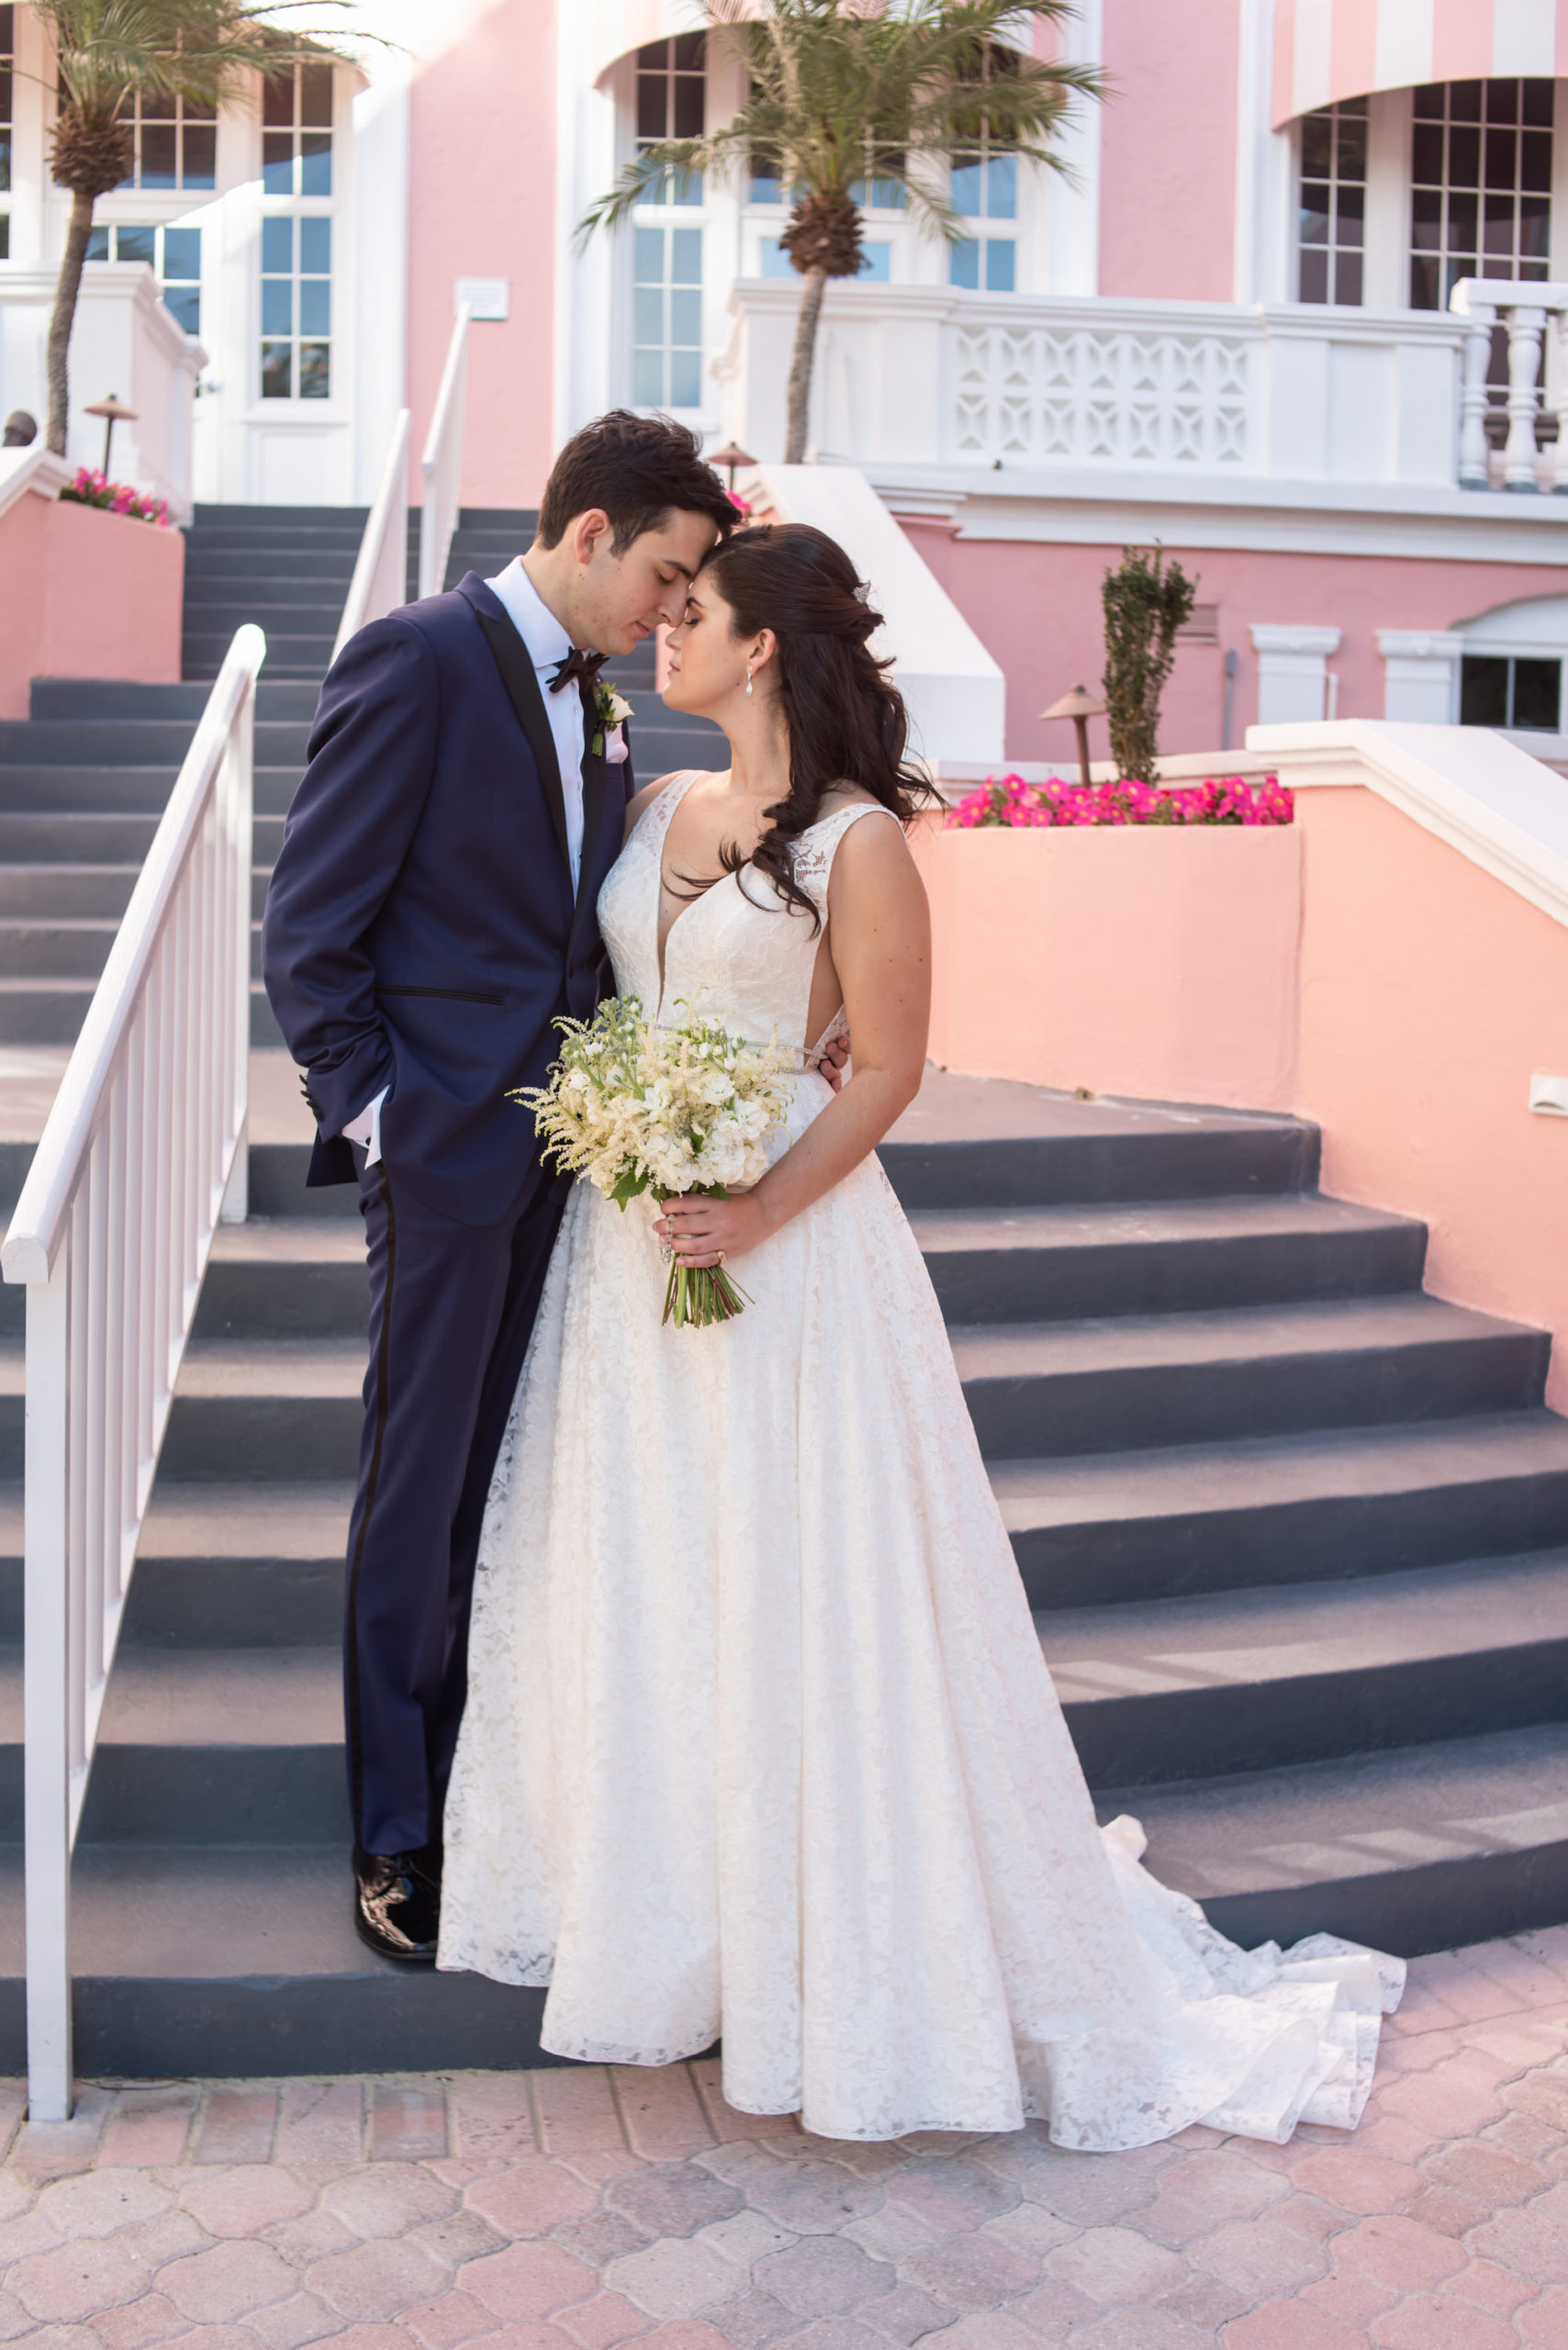 Florida Bride and Groom Wedding Portrait on Staircase at The Pink Palace | St. Petersburg Waterfront Hotel Wedding Venue The Don CeSar